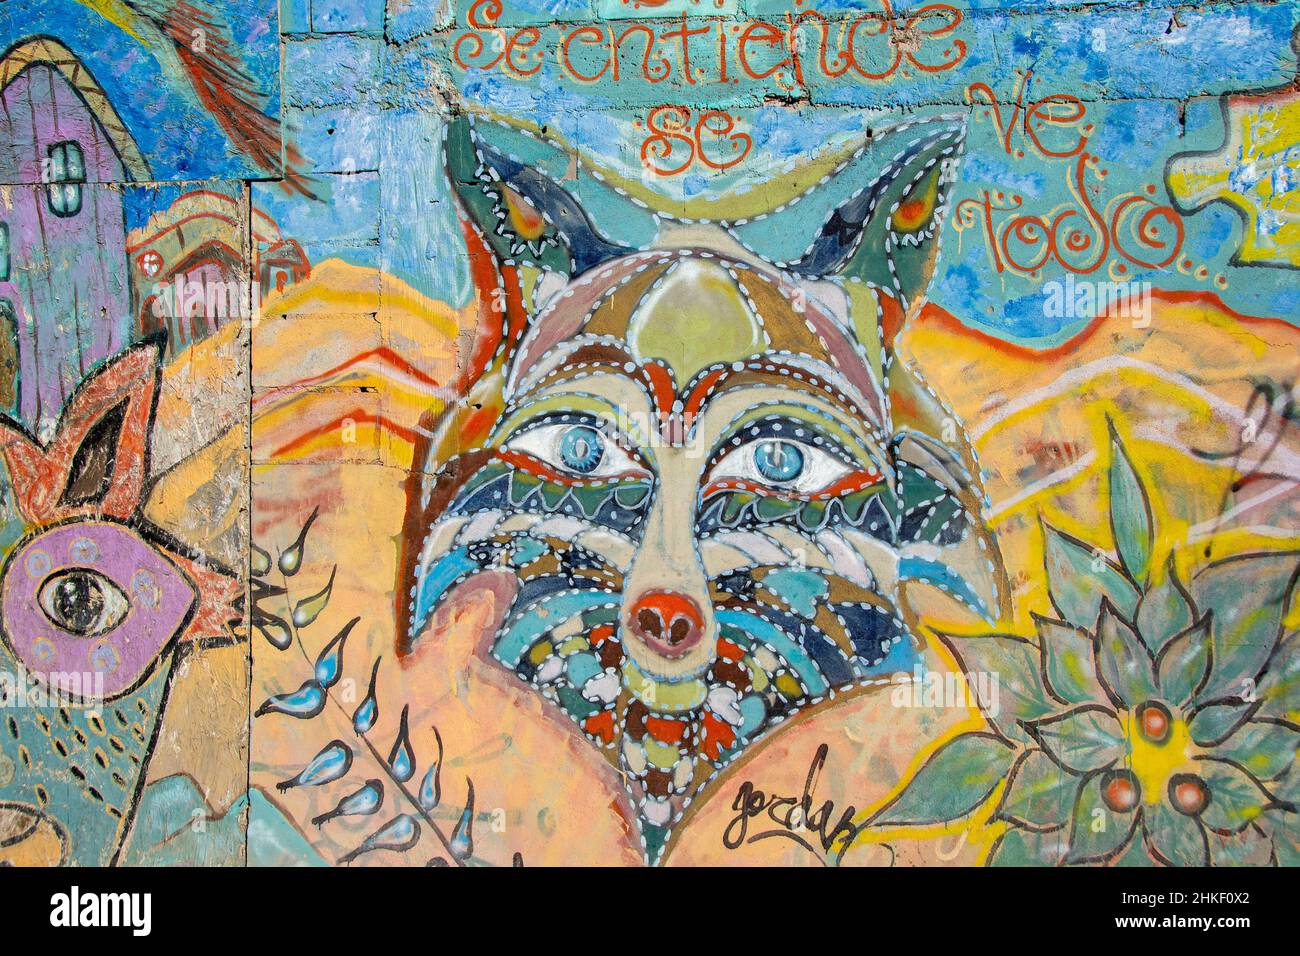 A public mural of a fox located in the Art's District of the city of Puerto Penasco, Mexico. Stock Photo